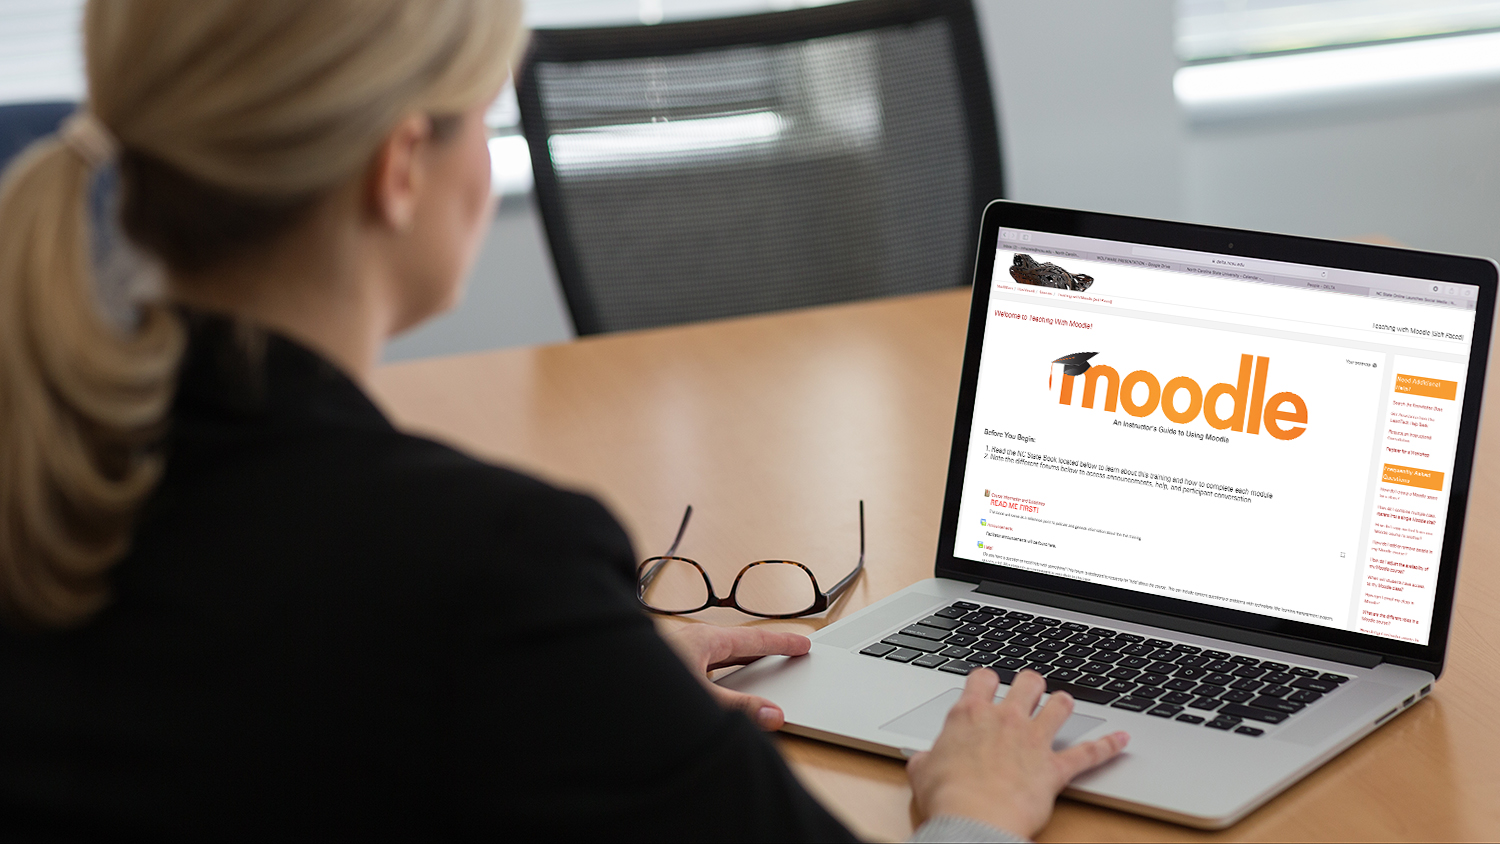 Decorative: Woman working on laptop that displays Moodle logo.